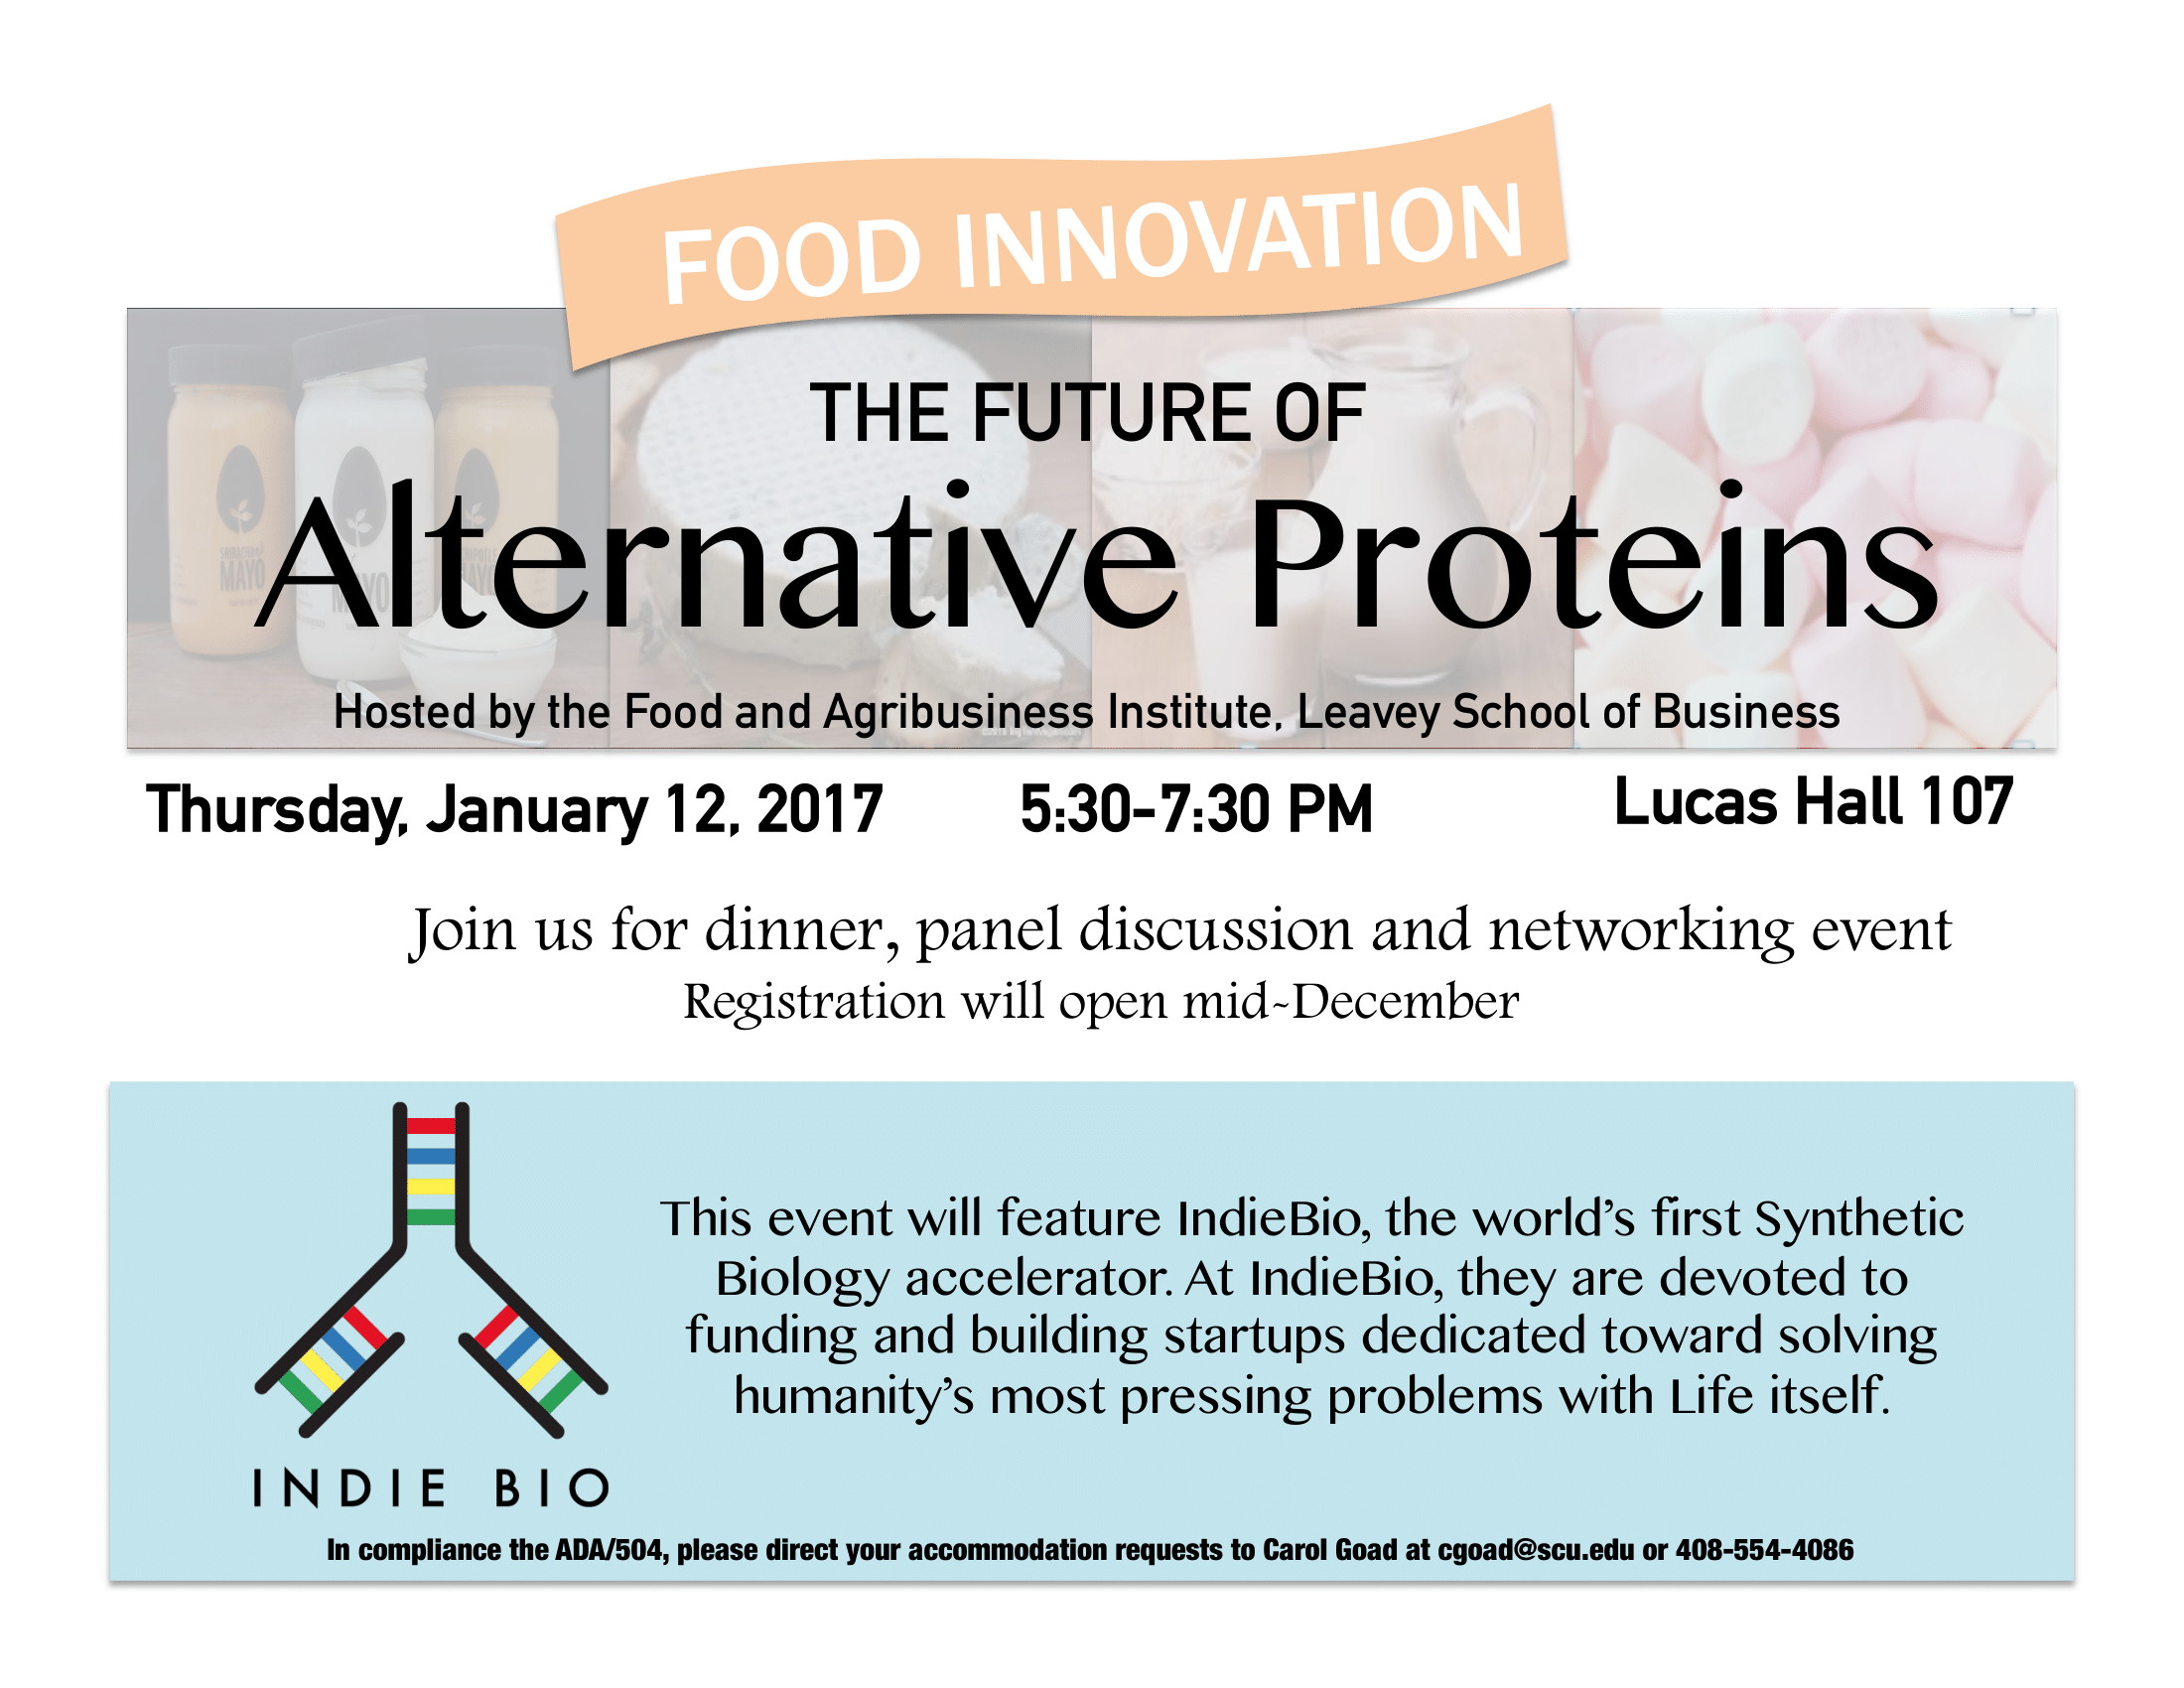 Alt. Proteins part 2 event flyer image link to story